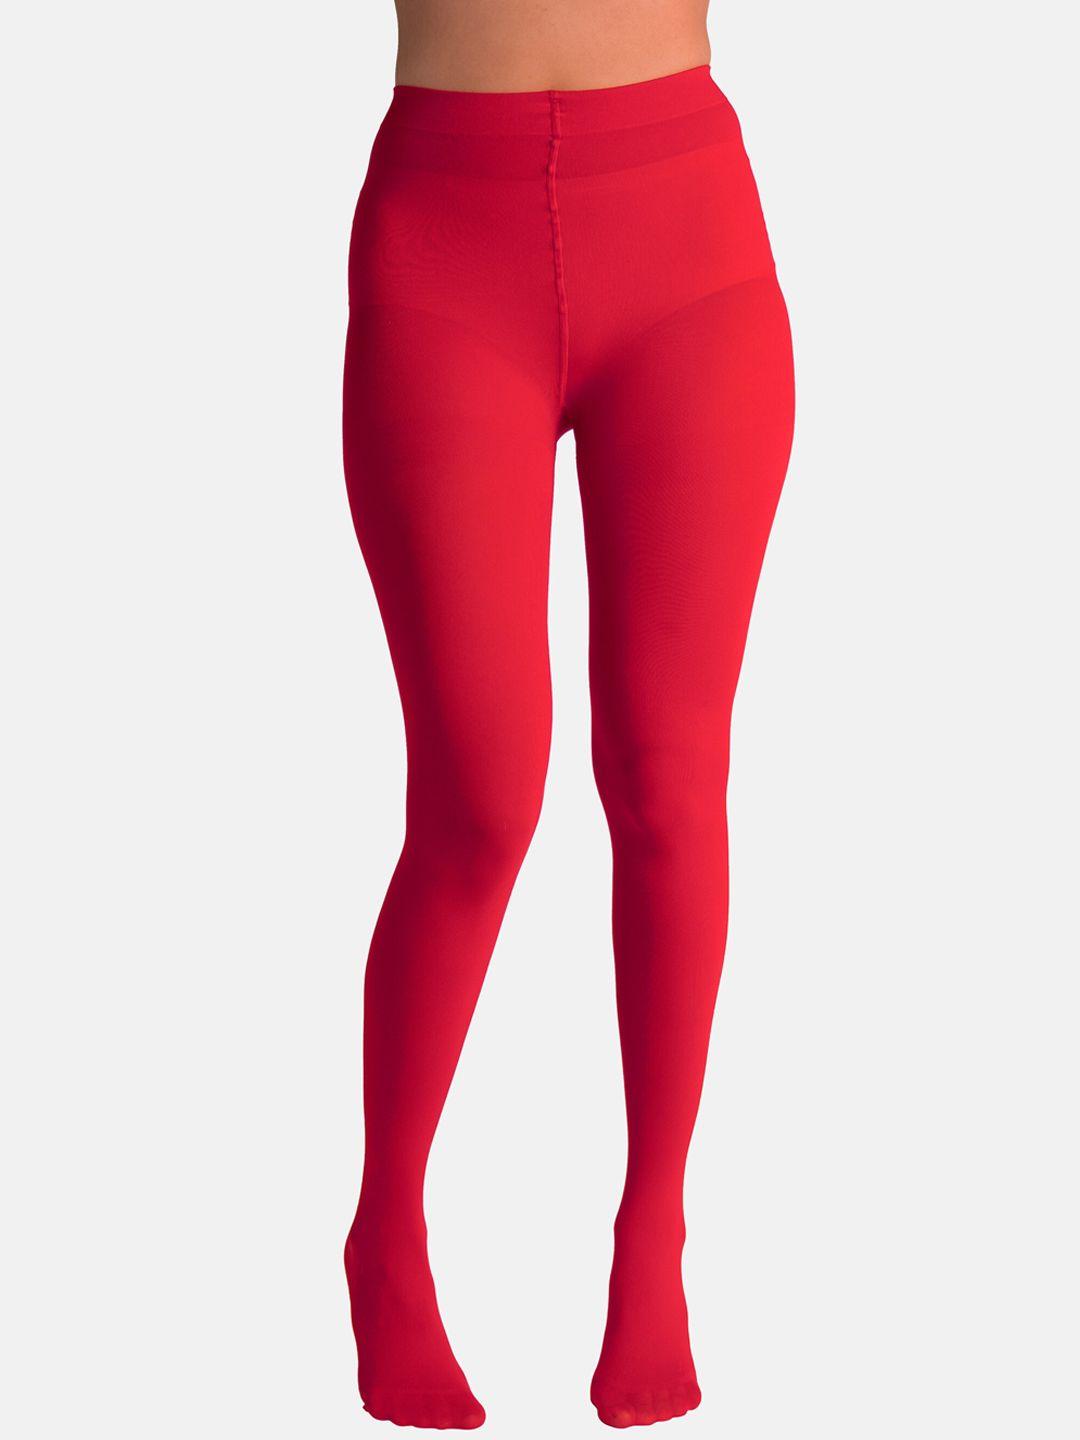 theater women red solid stockings